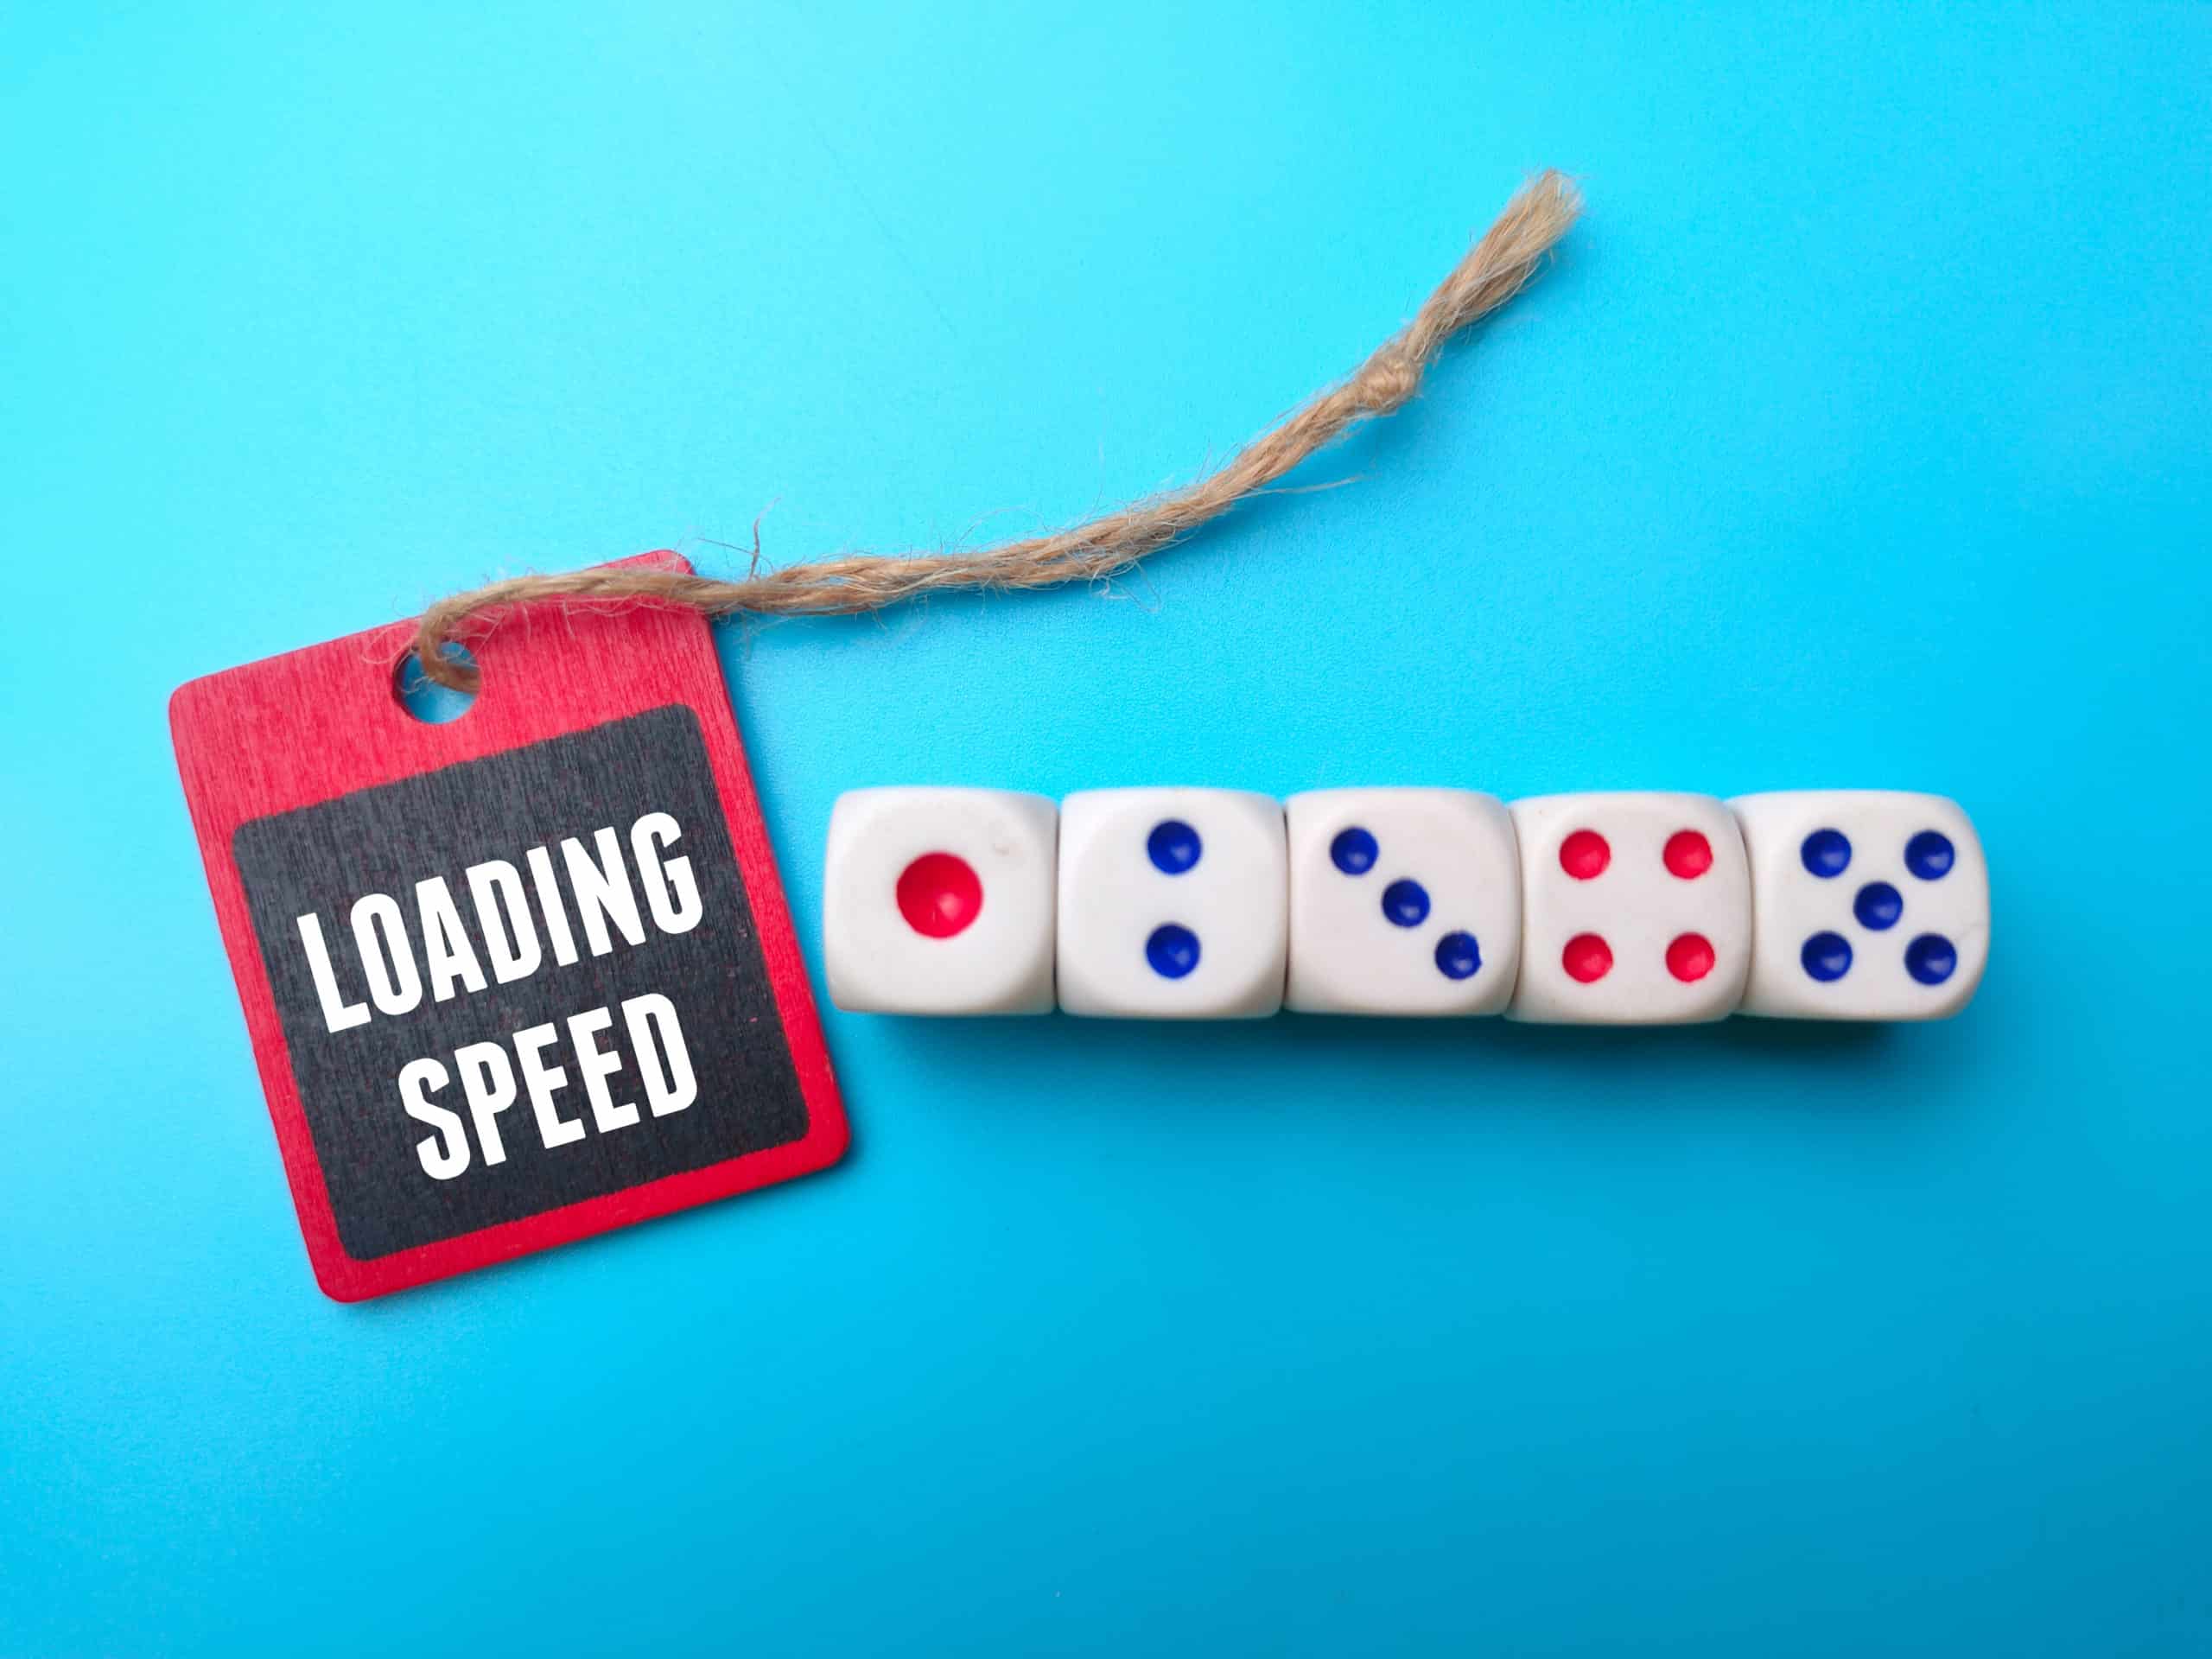 Red tag with "website speed" text next to rolled dice displaying one to five dots against a blue background.